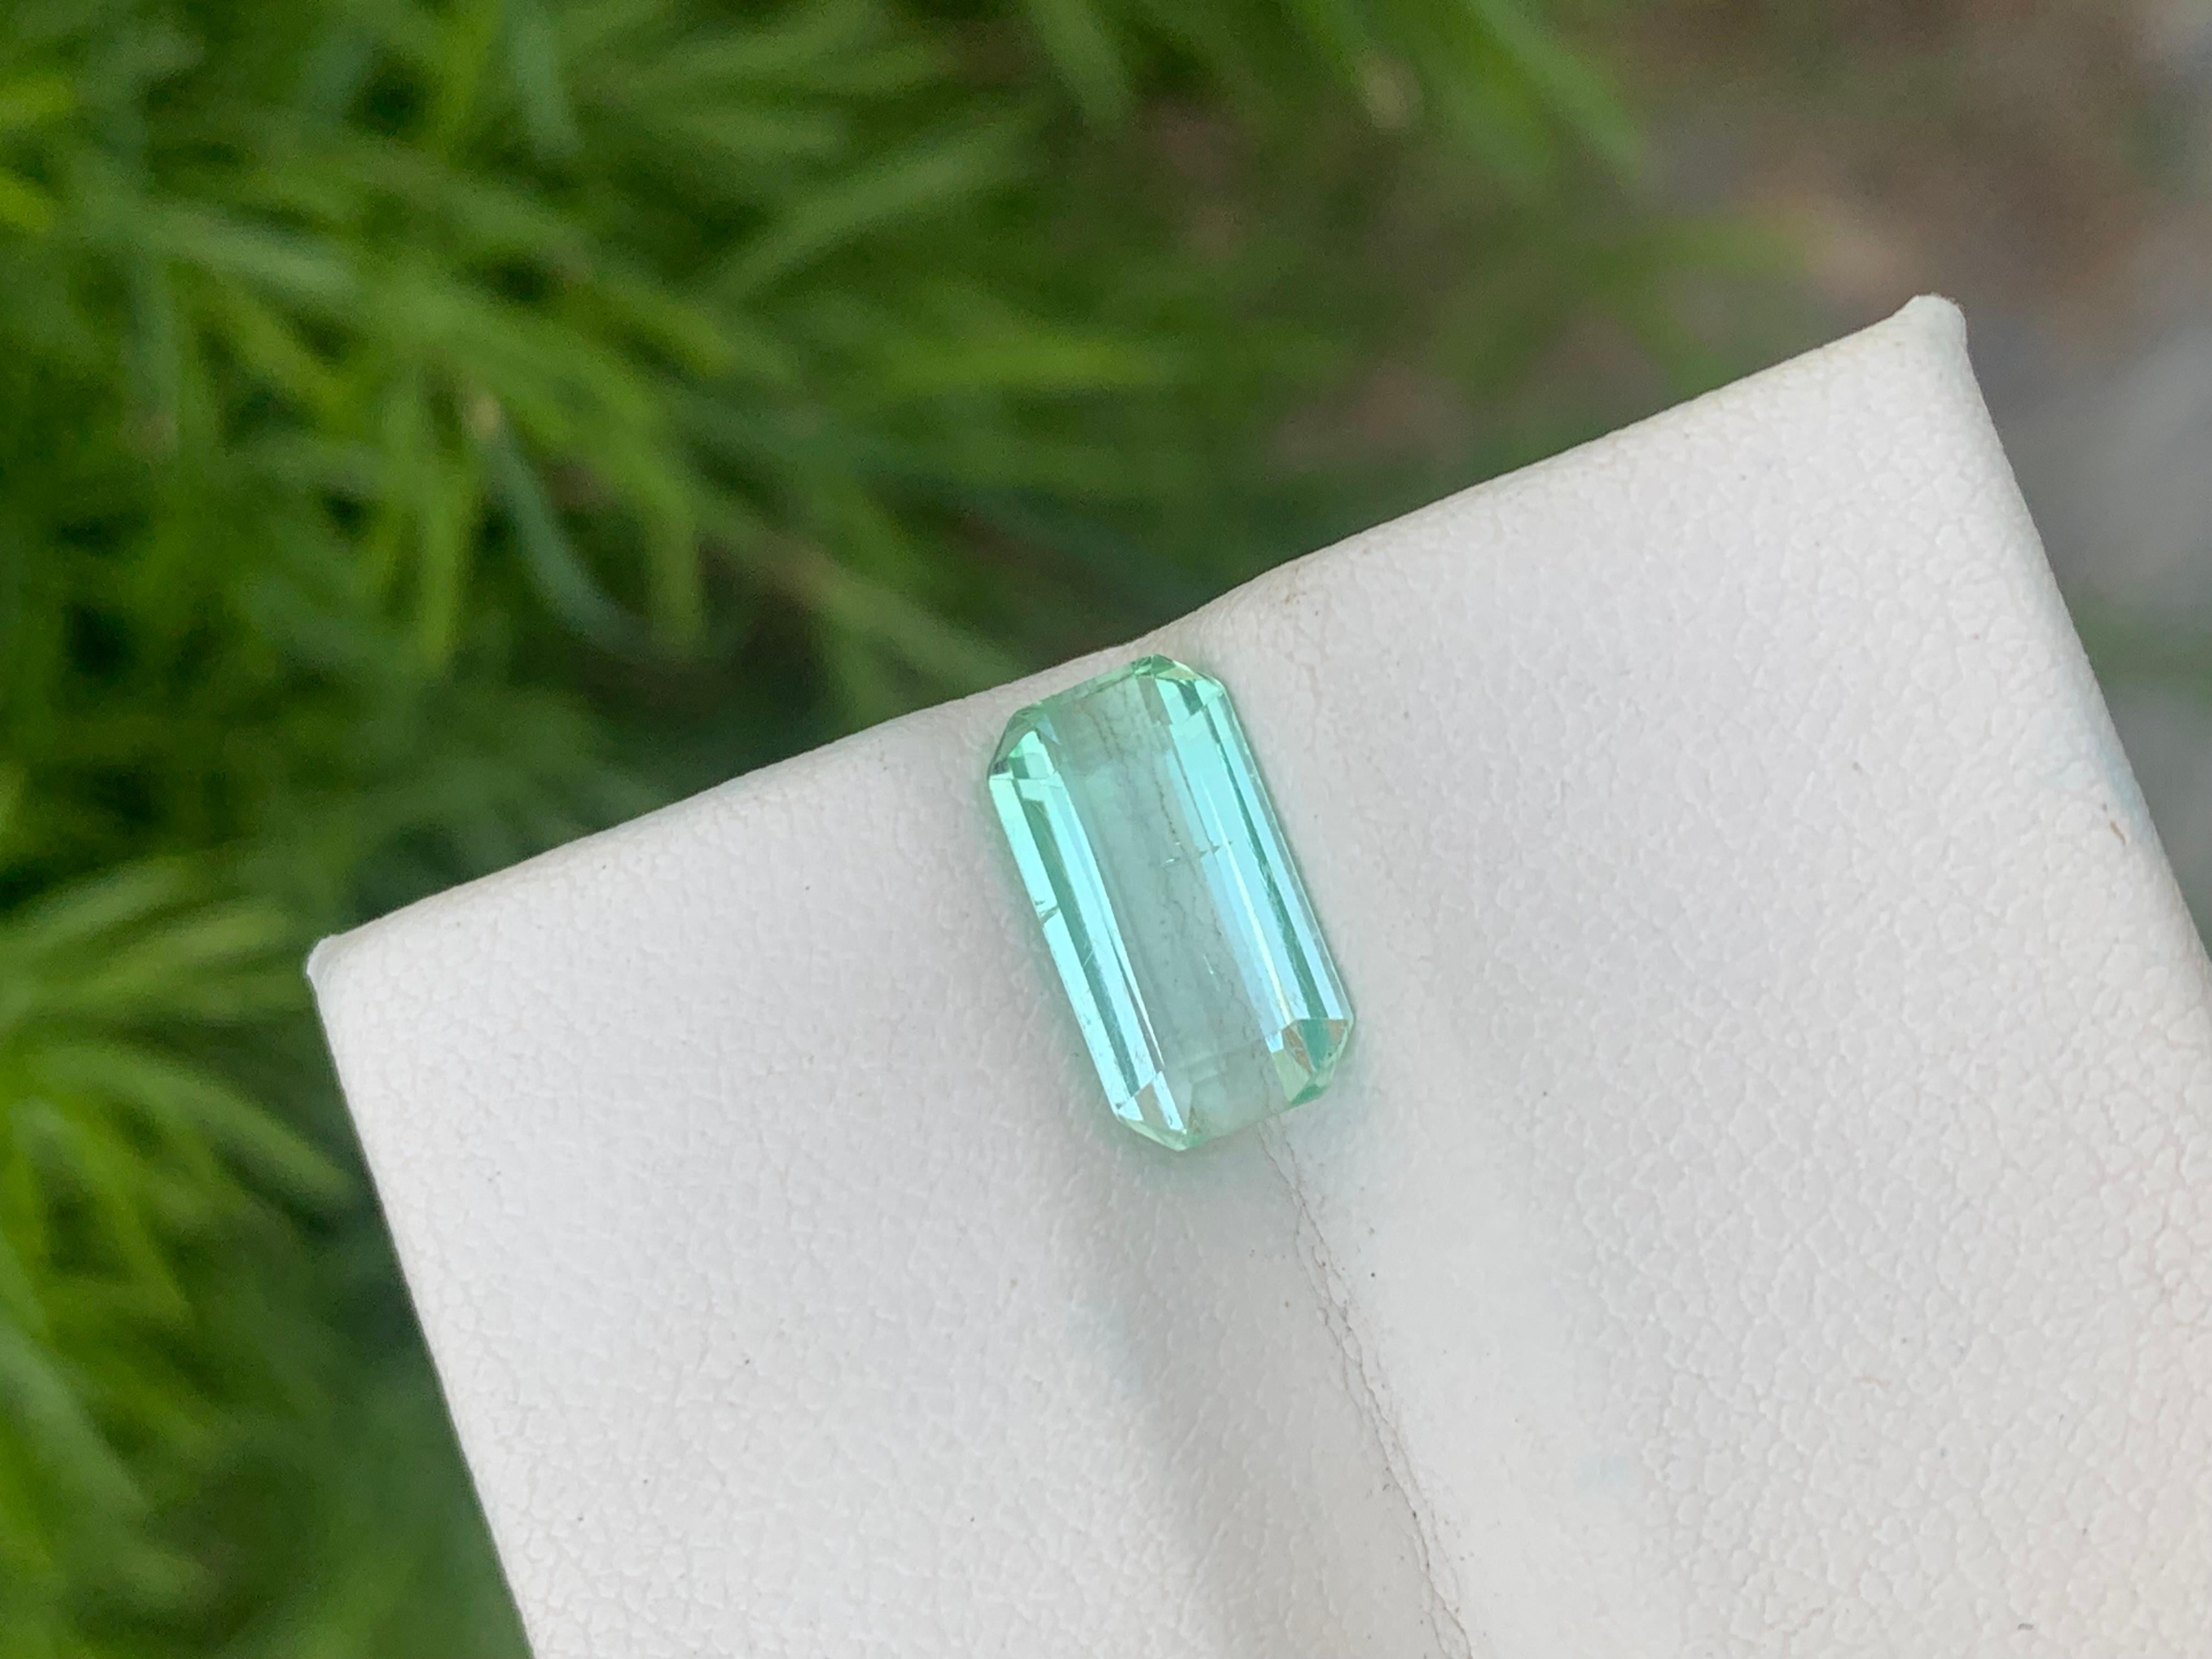 Loose light Mint Green Tourmaline
Weight: 2.25 Carats
Dimension: 11.1 x 6 x 3.6 Mm
Colour: Light Mint Green 
Origin: Afghanistan
Certificate: On Demand
Treatment: Non

Tourmaline is a captivating gemstone known for its remarkable variety of colors,